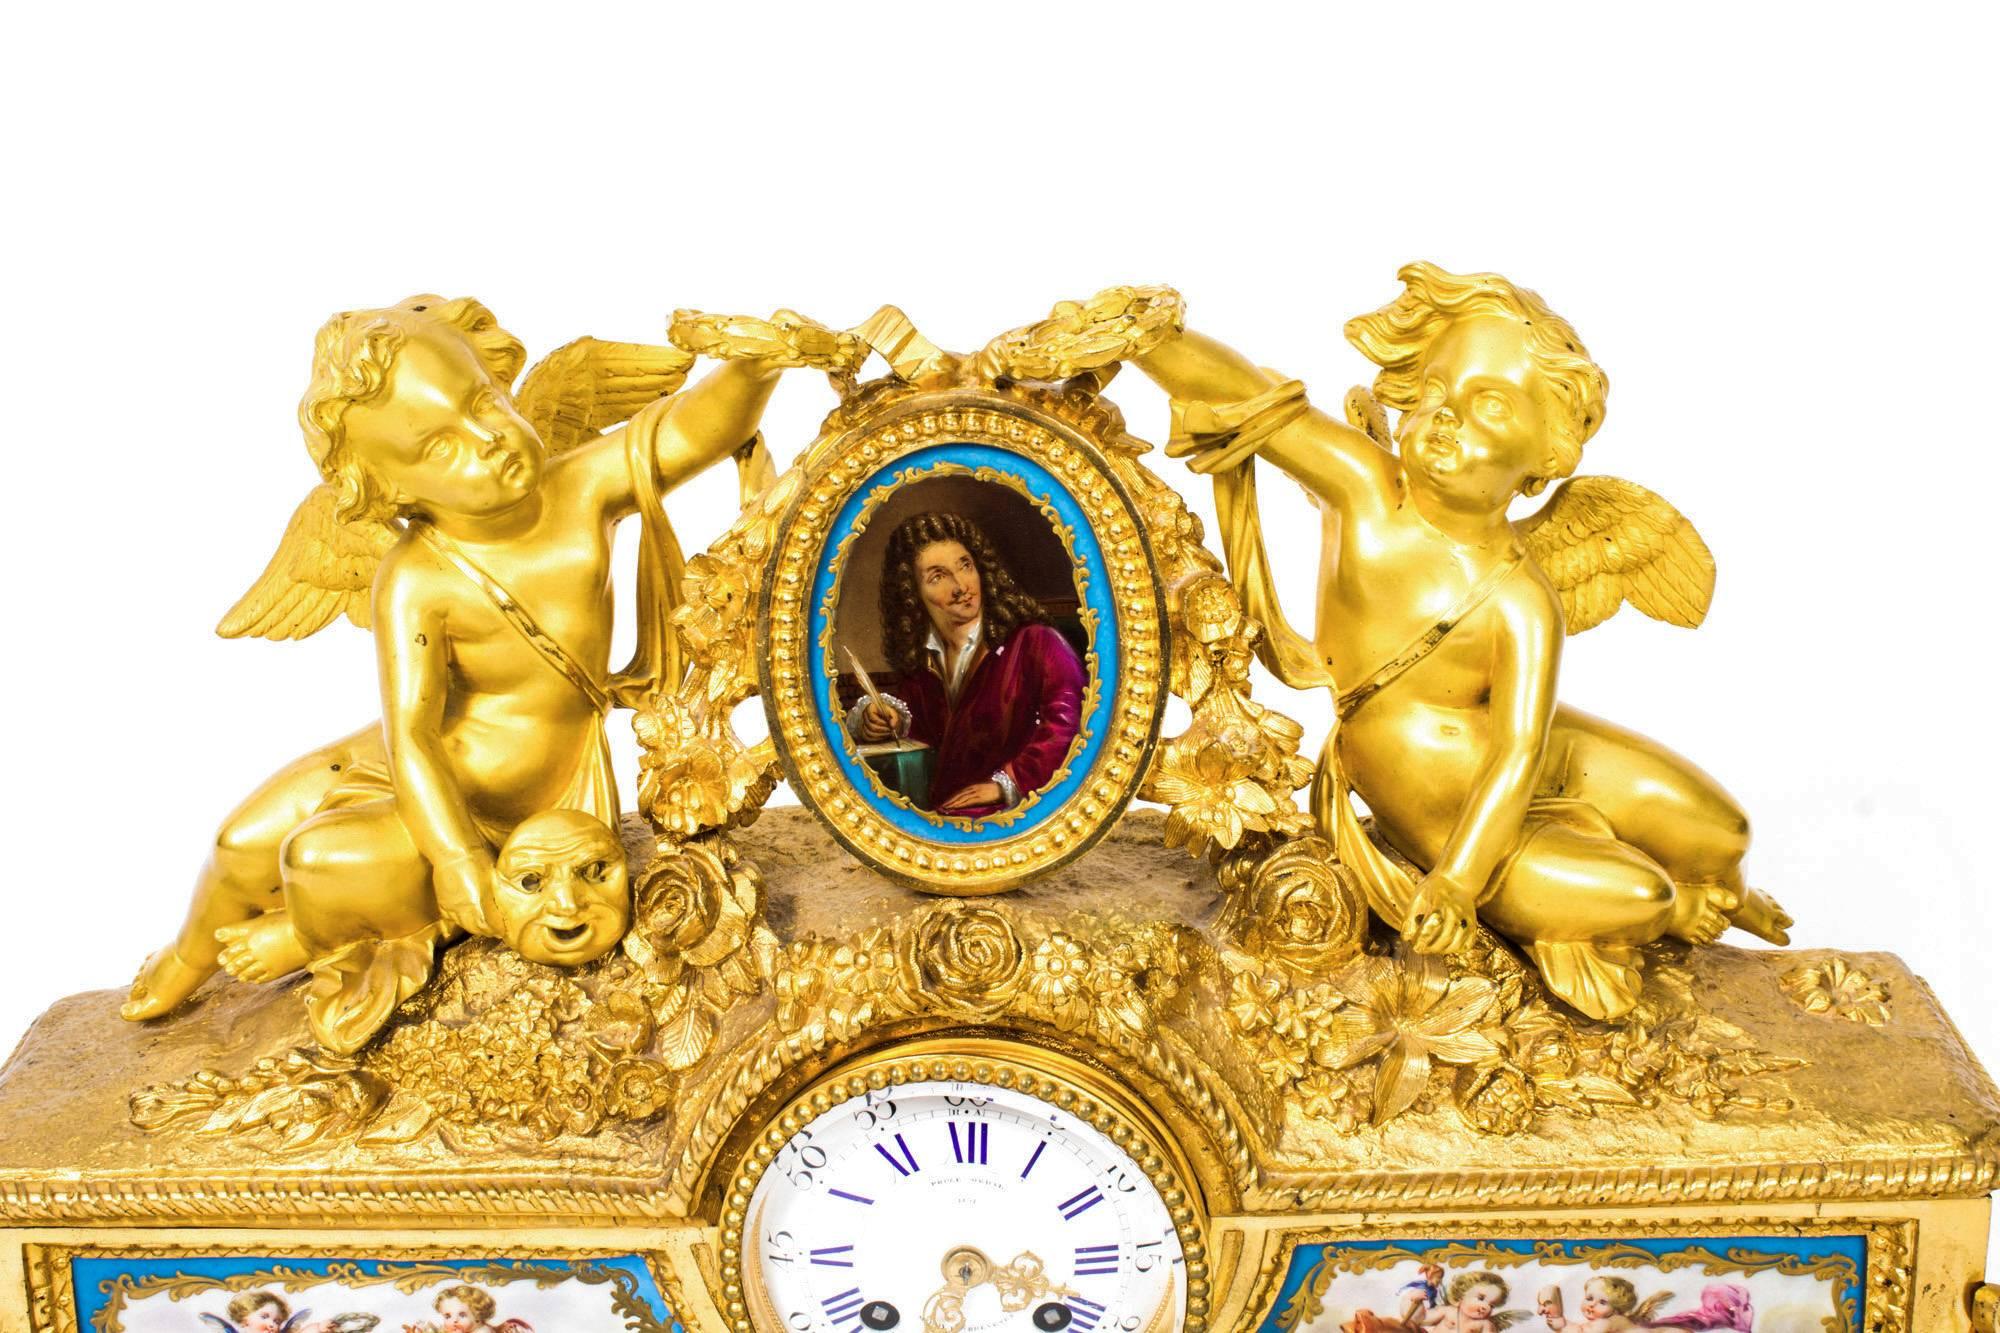 This is a superb antique French gilt bronze mantel clock with a profusion of Bleu Celeste porcelain panels in the Sèvres manner, circa 1860 in date. 

The case mounted with two cherubs holding wreaths representing theatre, flanking an oval Bleu